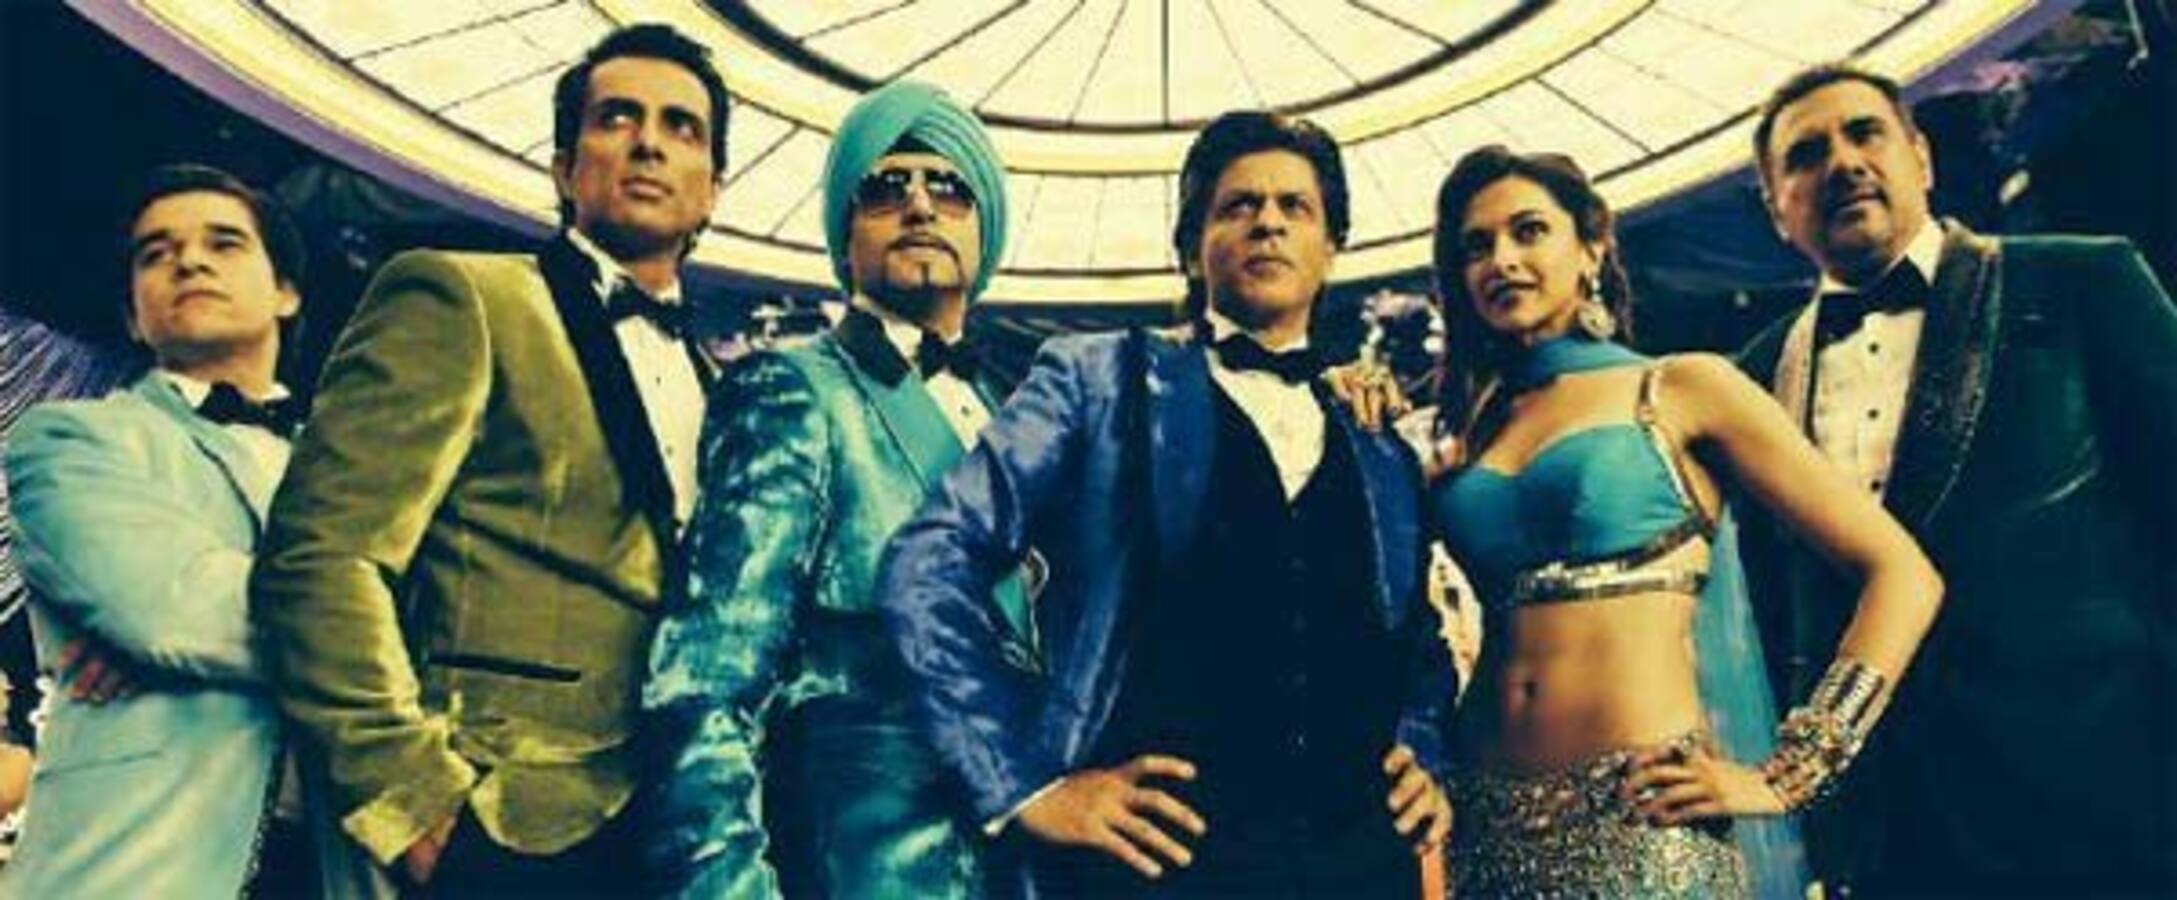 Shah Rukh Khan-Deepika Padukone's Happy New Year to release in Egypt on New Year's Eve!